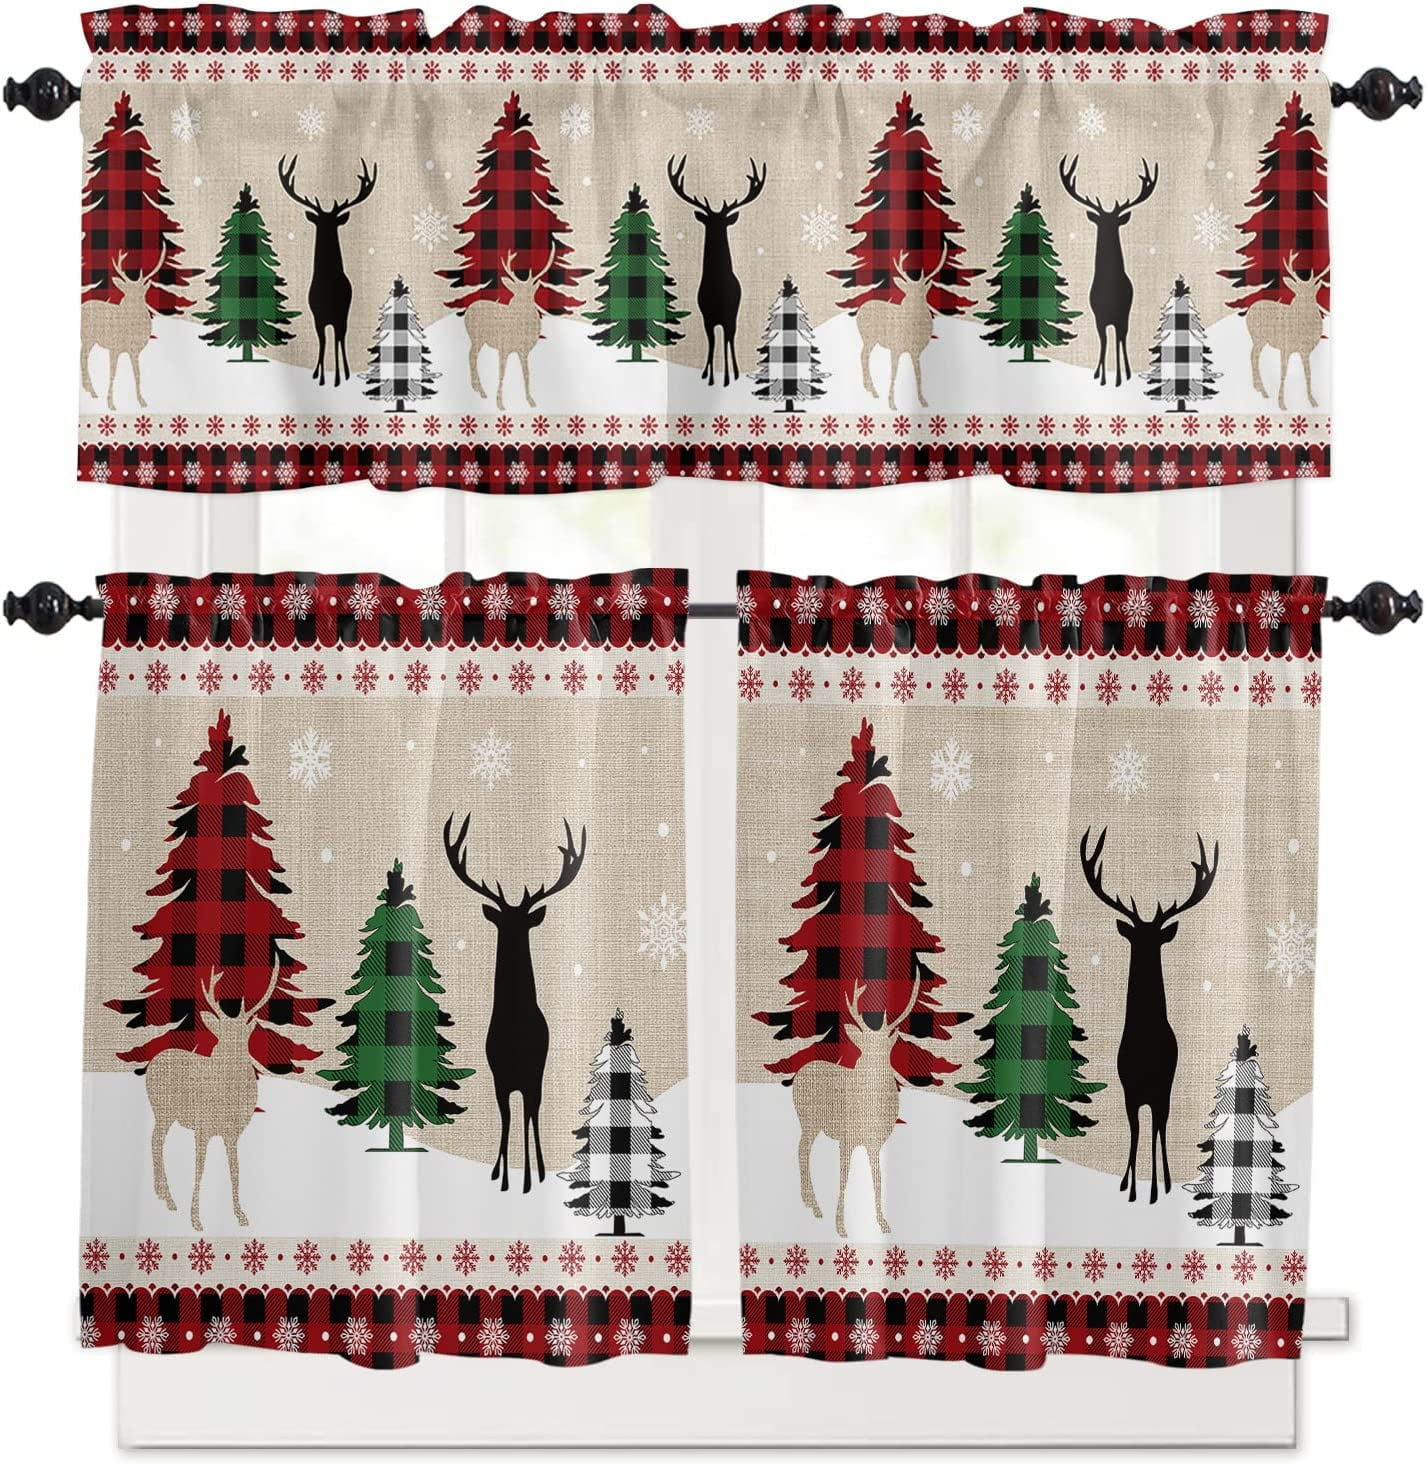  Valances for Windows Christmas Home on on Red Black Buffalo  Plaid Kitchen Curtains 27.5x24 Kitchen Decor Short Curtains, Blackout  Curtain Rods Pocket Small Window Curtains for Bedroom Bathroom : Home 